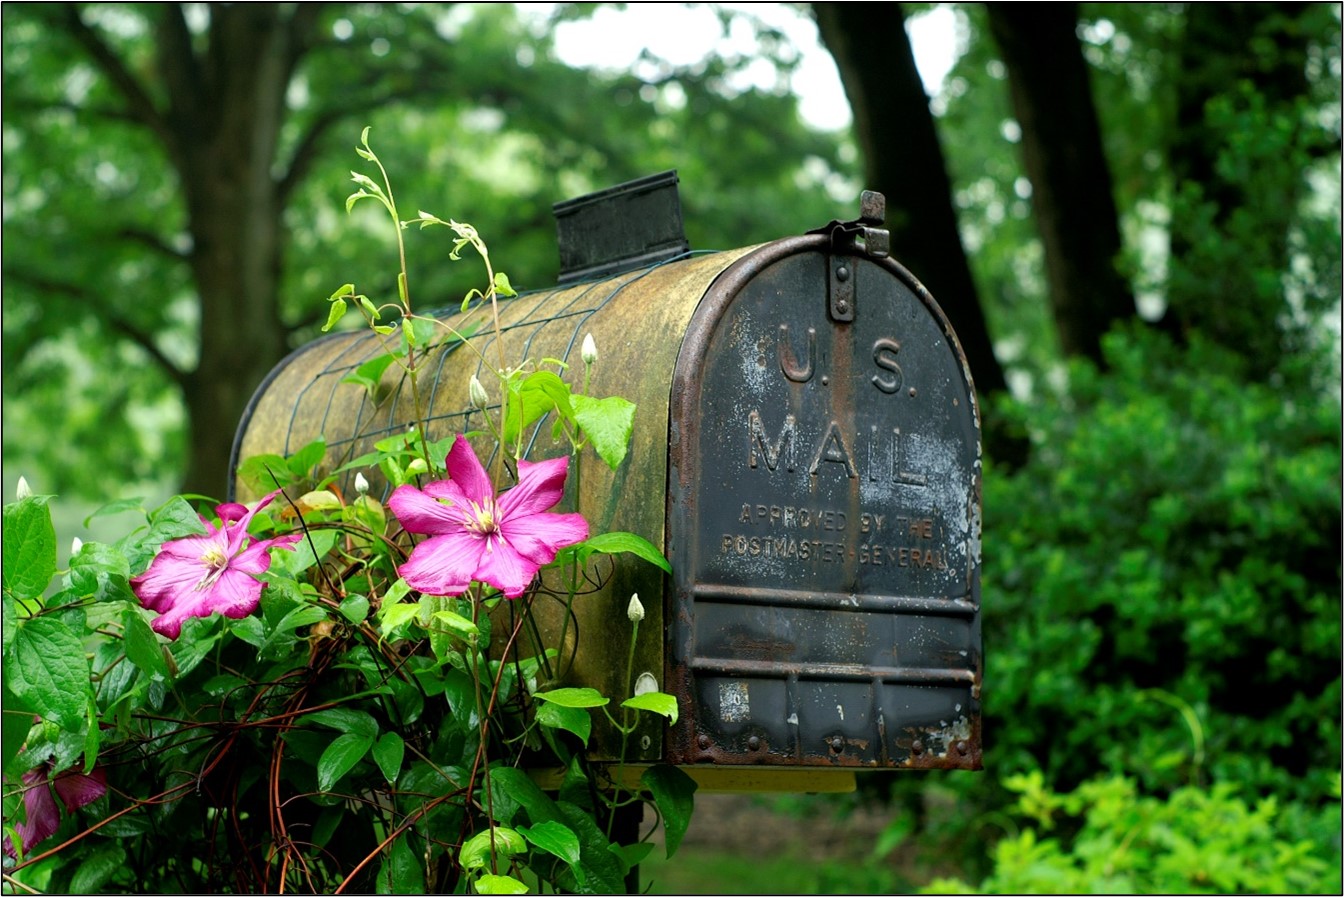 Mailbox Improvement Week Arrives in Time for Spring Cleaning Florida